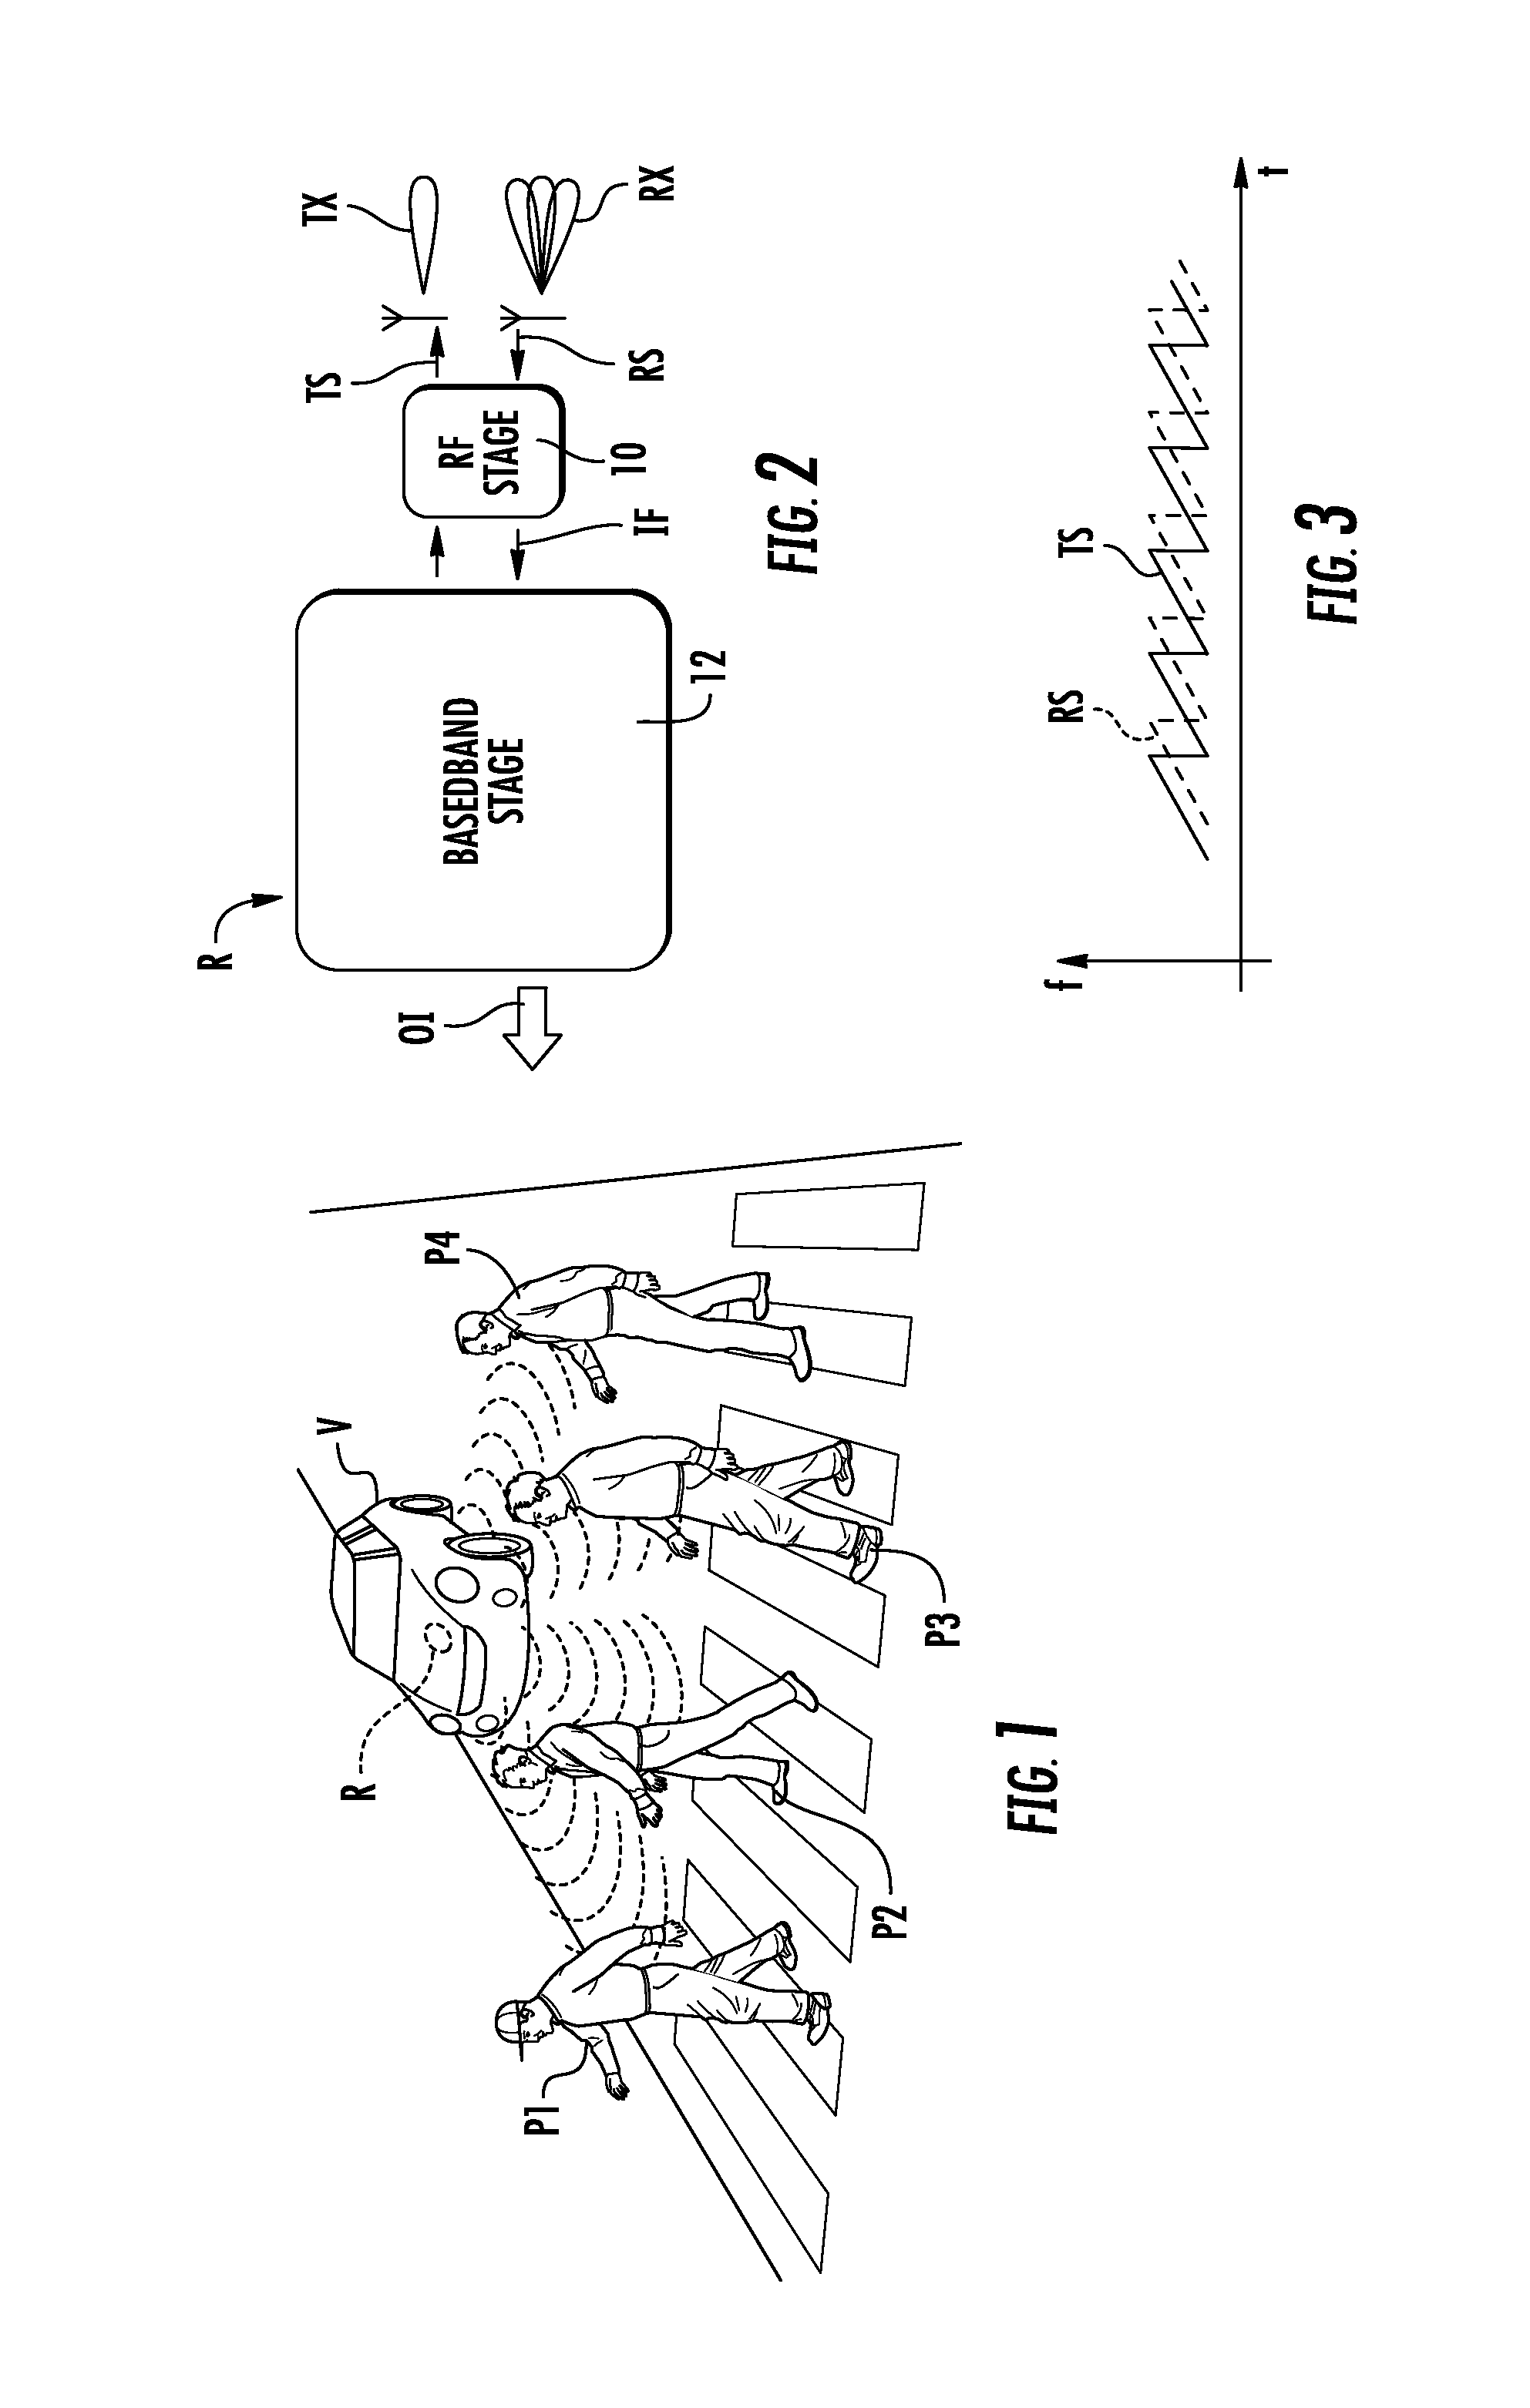 Method and devices for processing radar signals